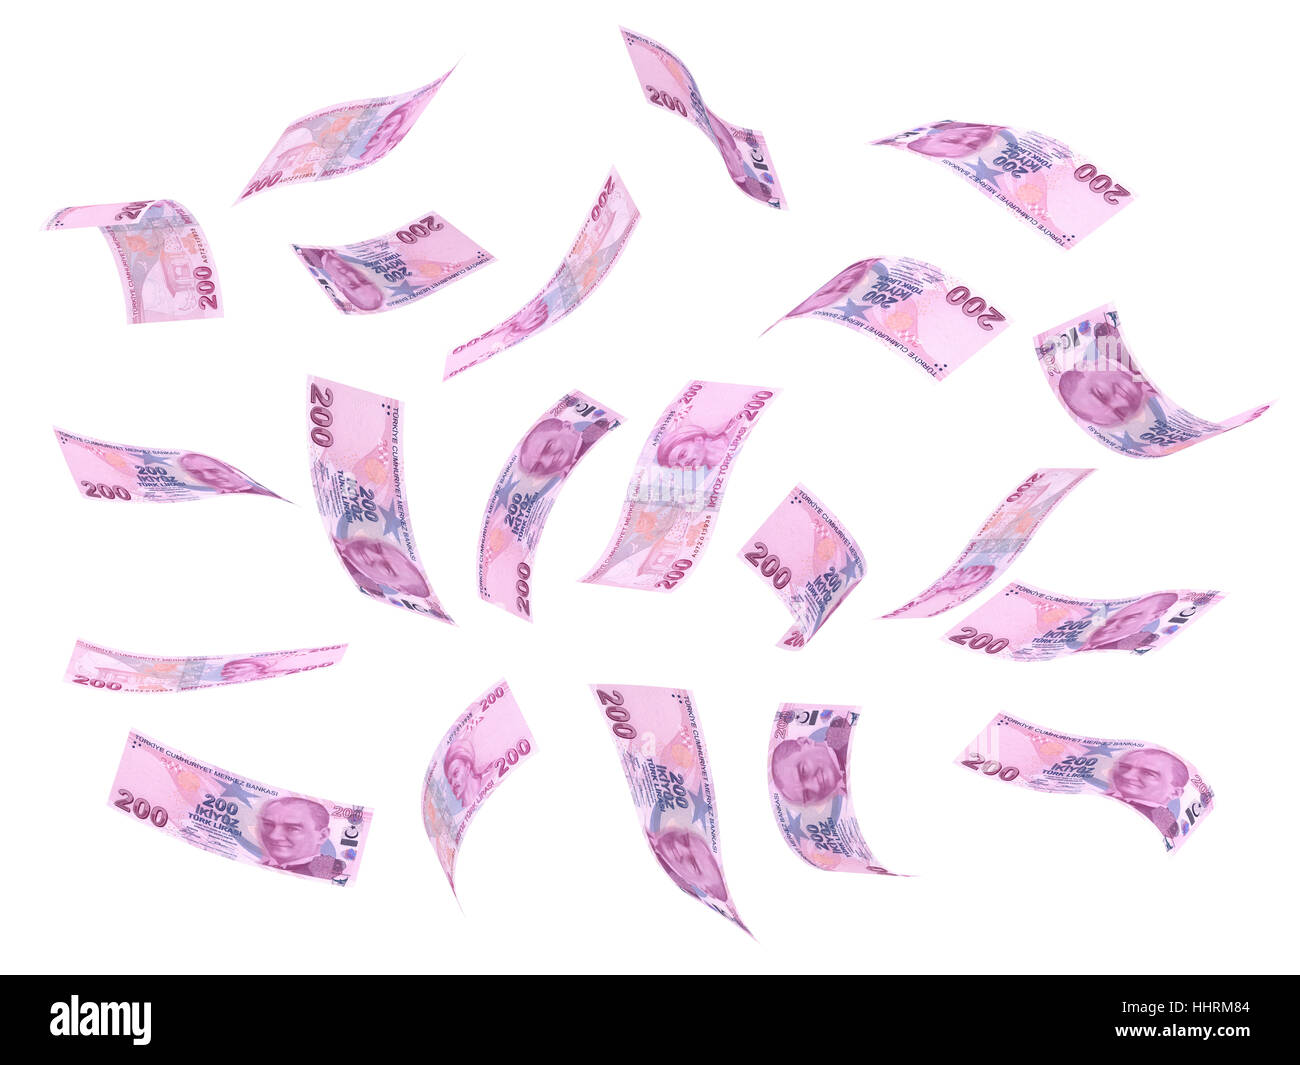 currency, wealth, turkey, finance, curve, savings, nobody, cash flow, concepts, Stock Photo